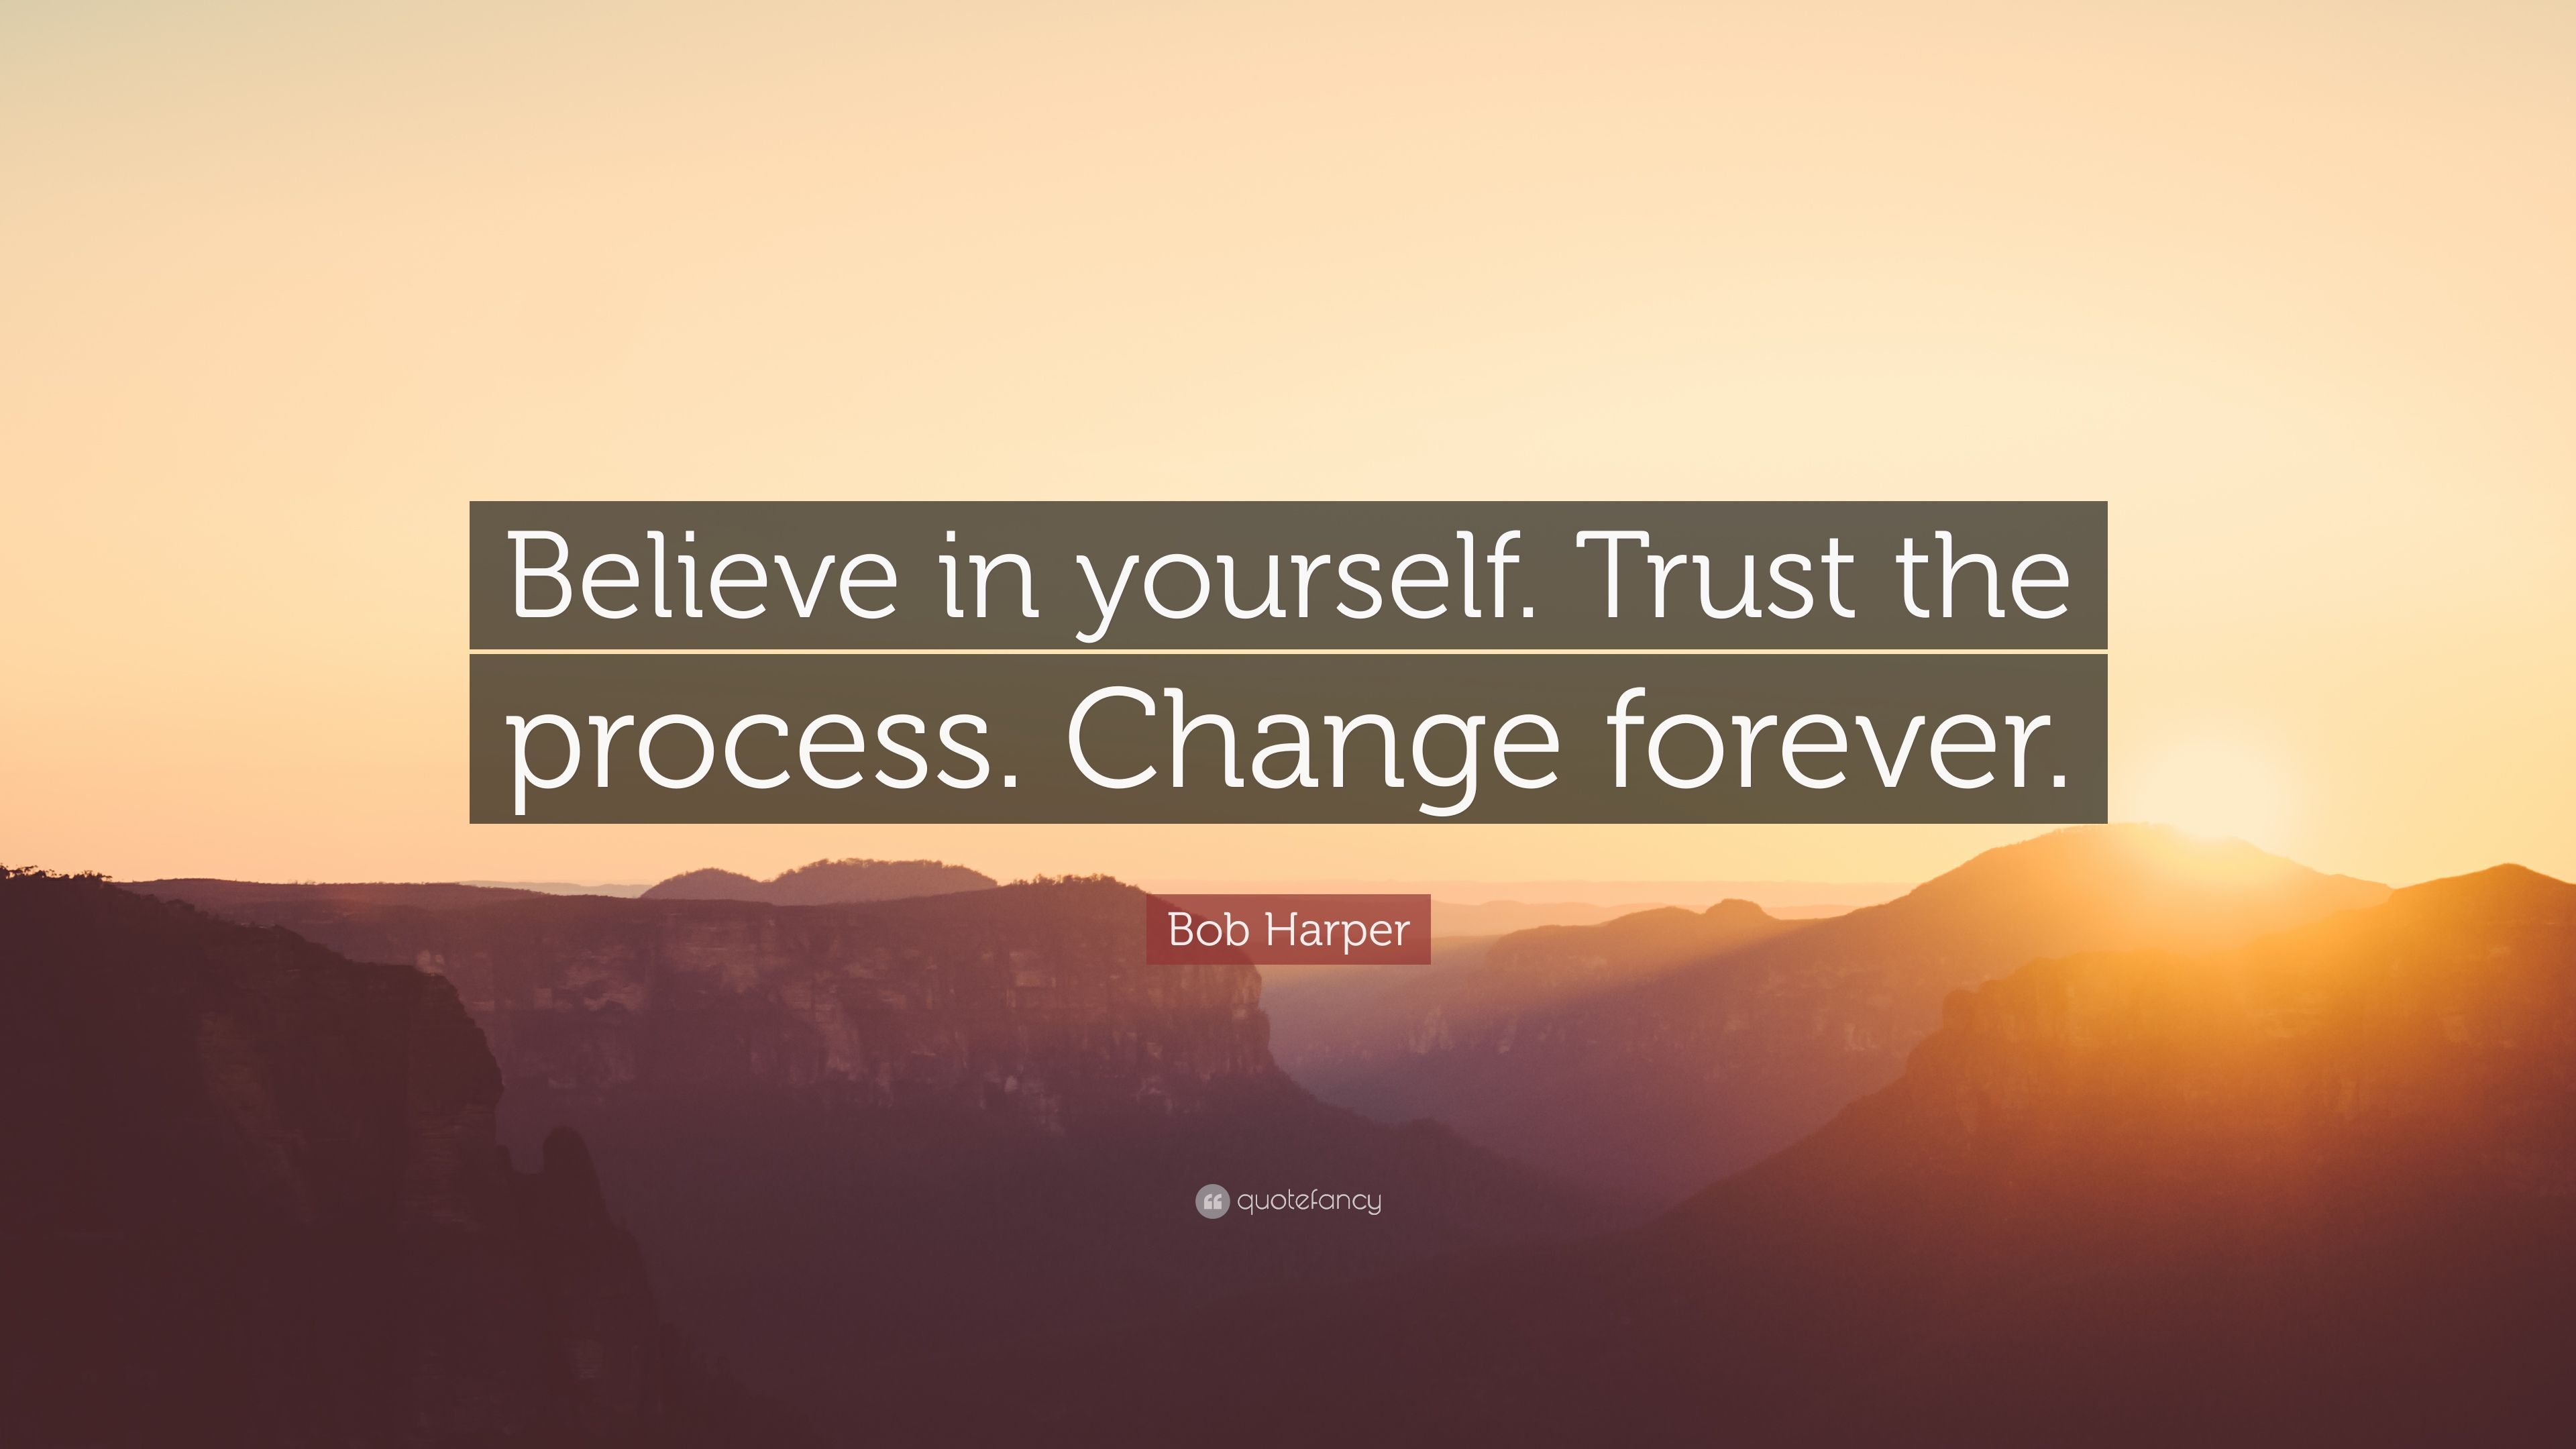 Bob Harper Quote: “Believe in yourself. Trust the process. Change forever.” (12 wallpaper)